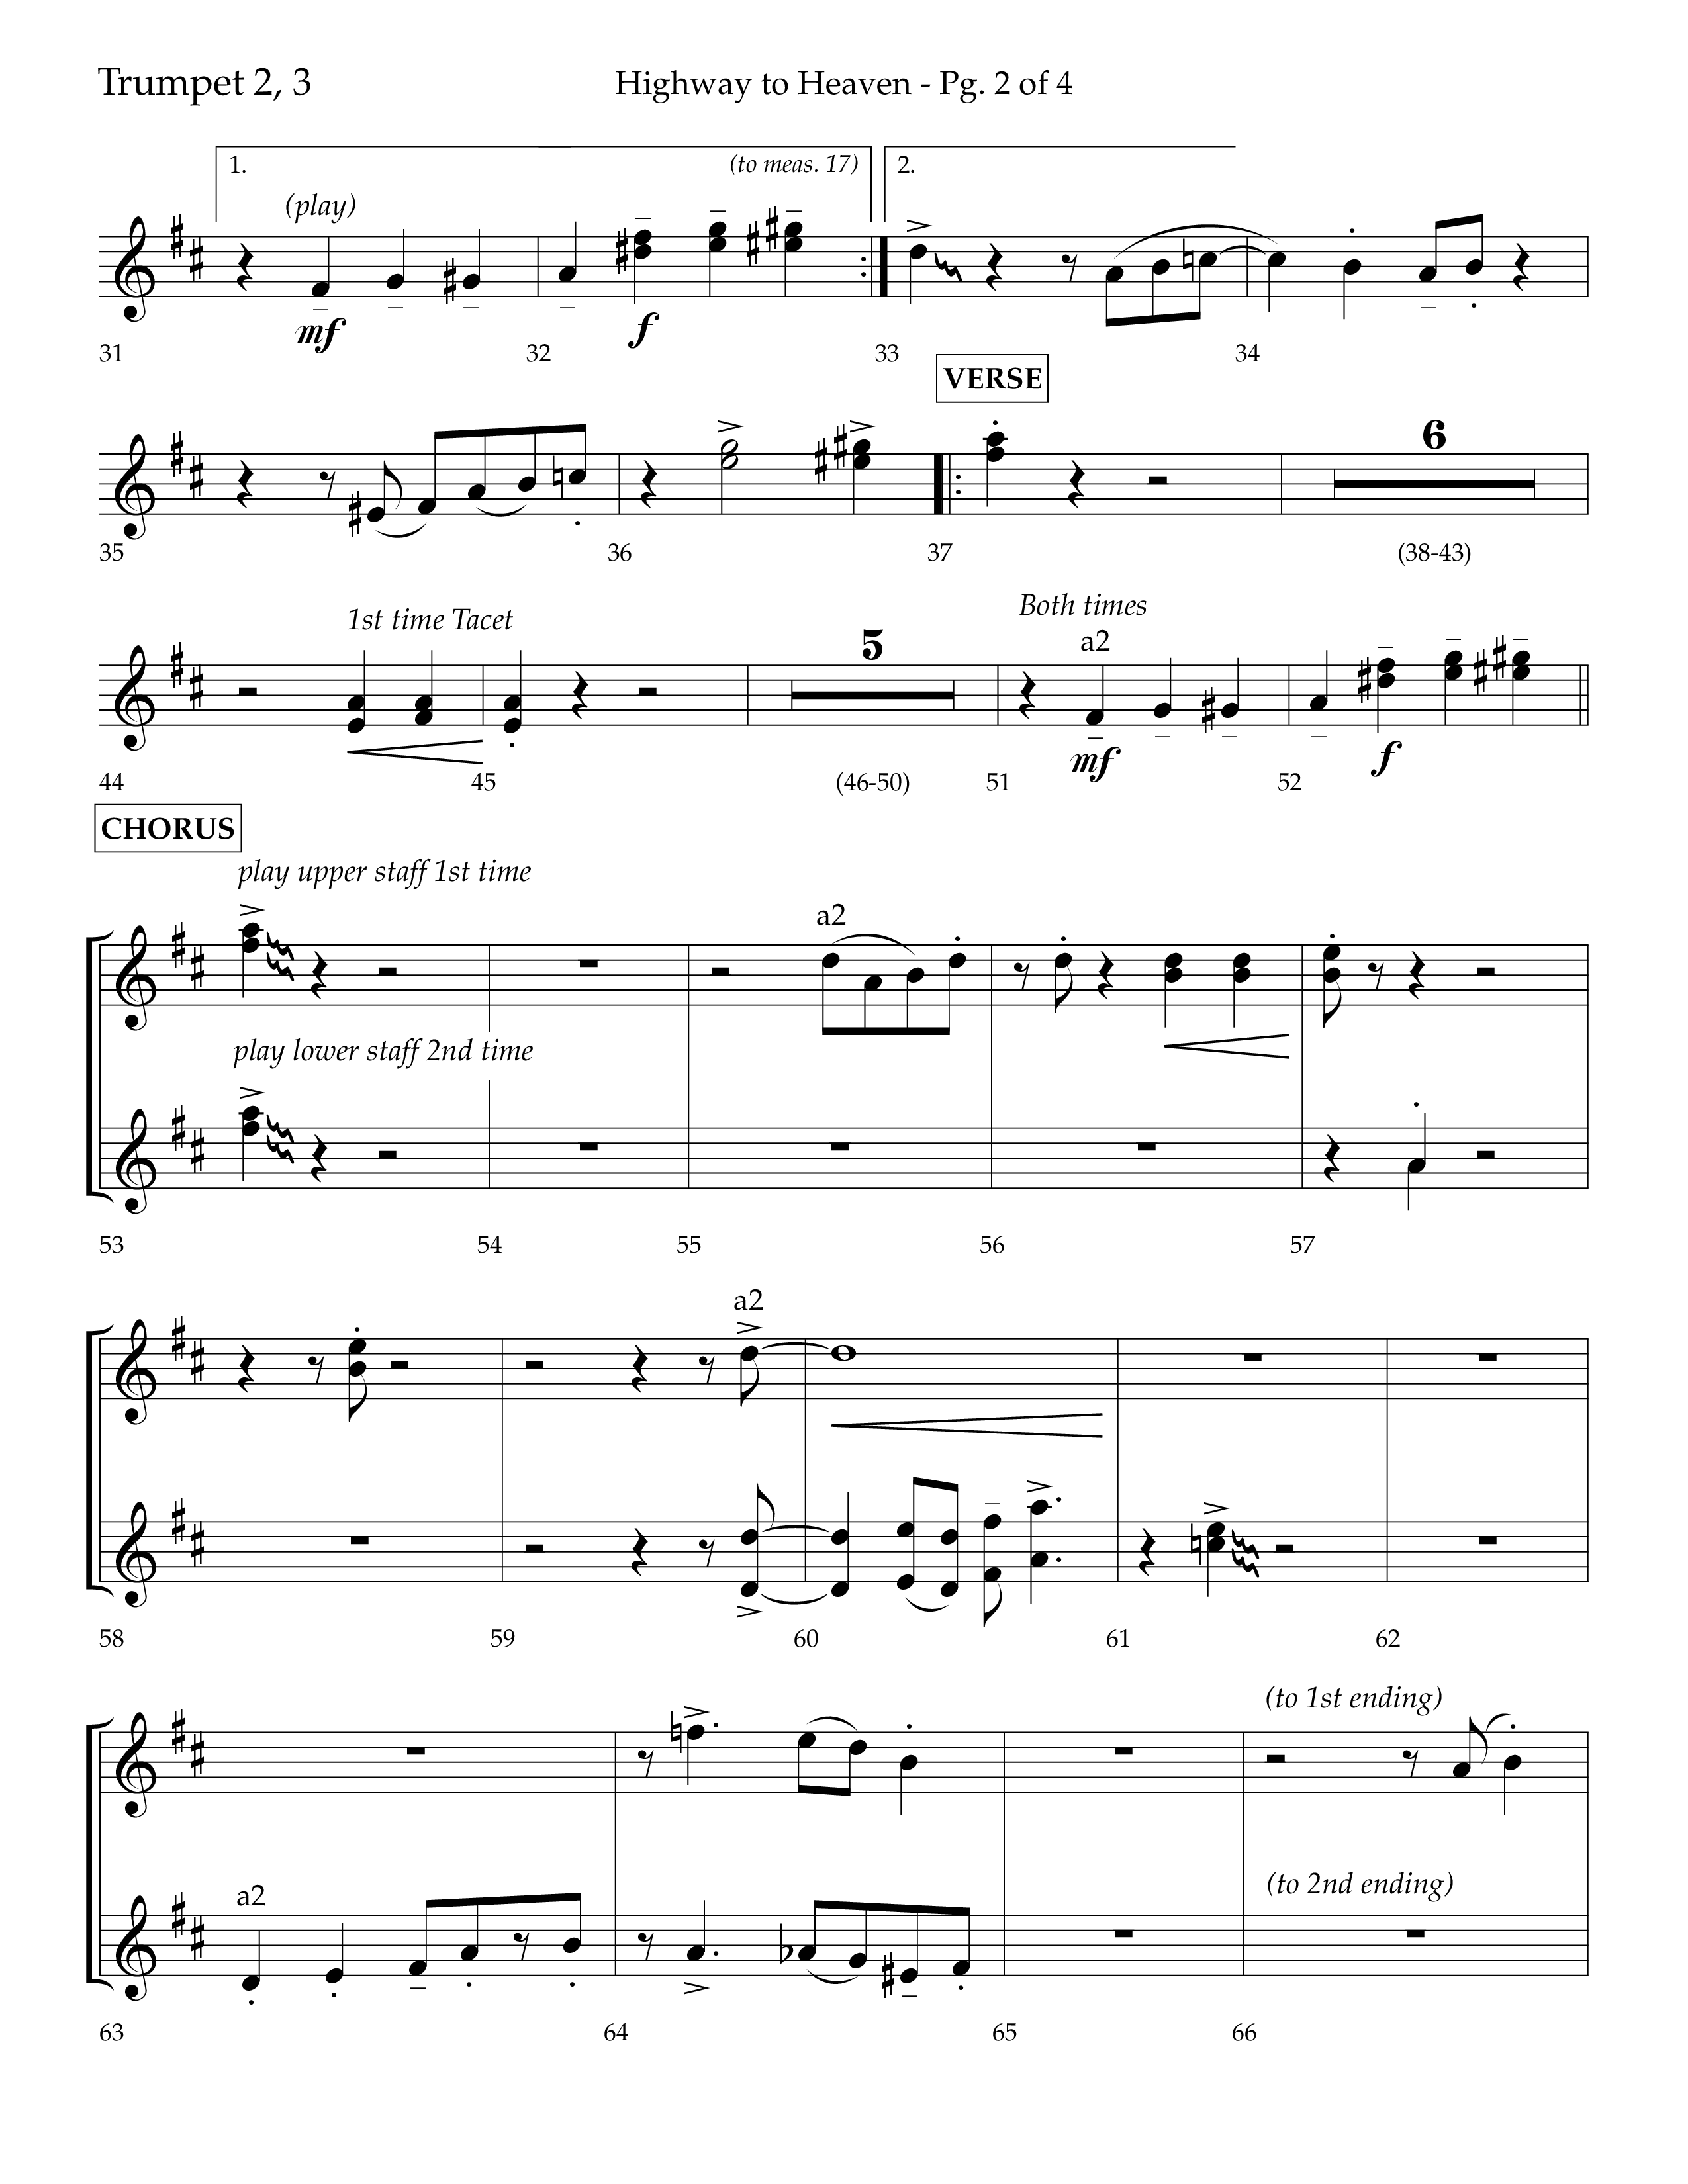 Highway To Heaven with When We All Get To Heaven (Choral Anthem SATB) Trumpet 2/3 (Lifeway Choral / Arr. Bradley Knight)